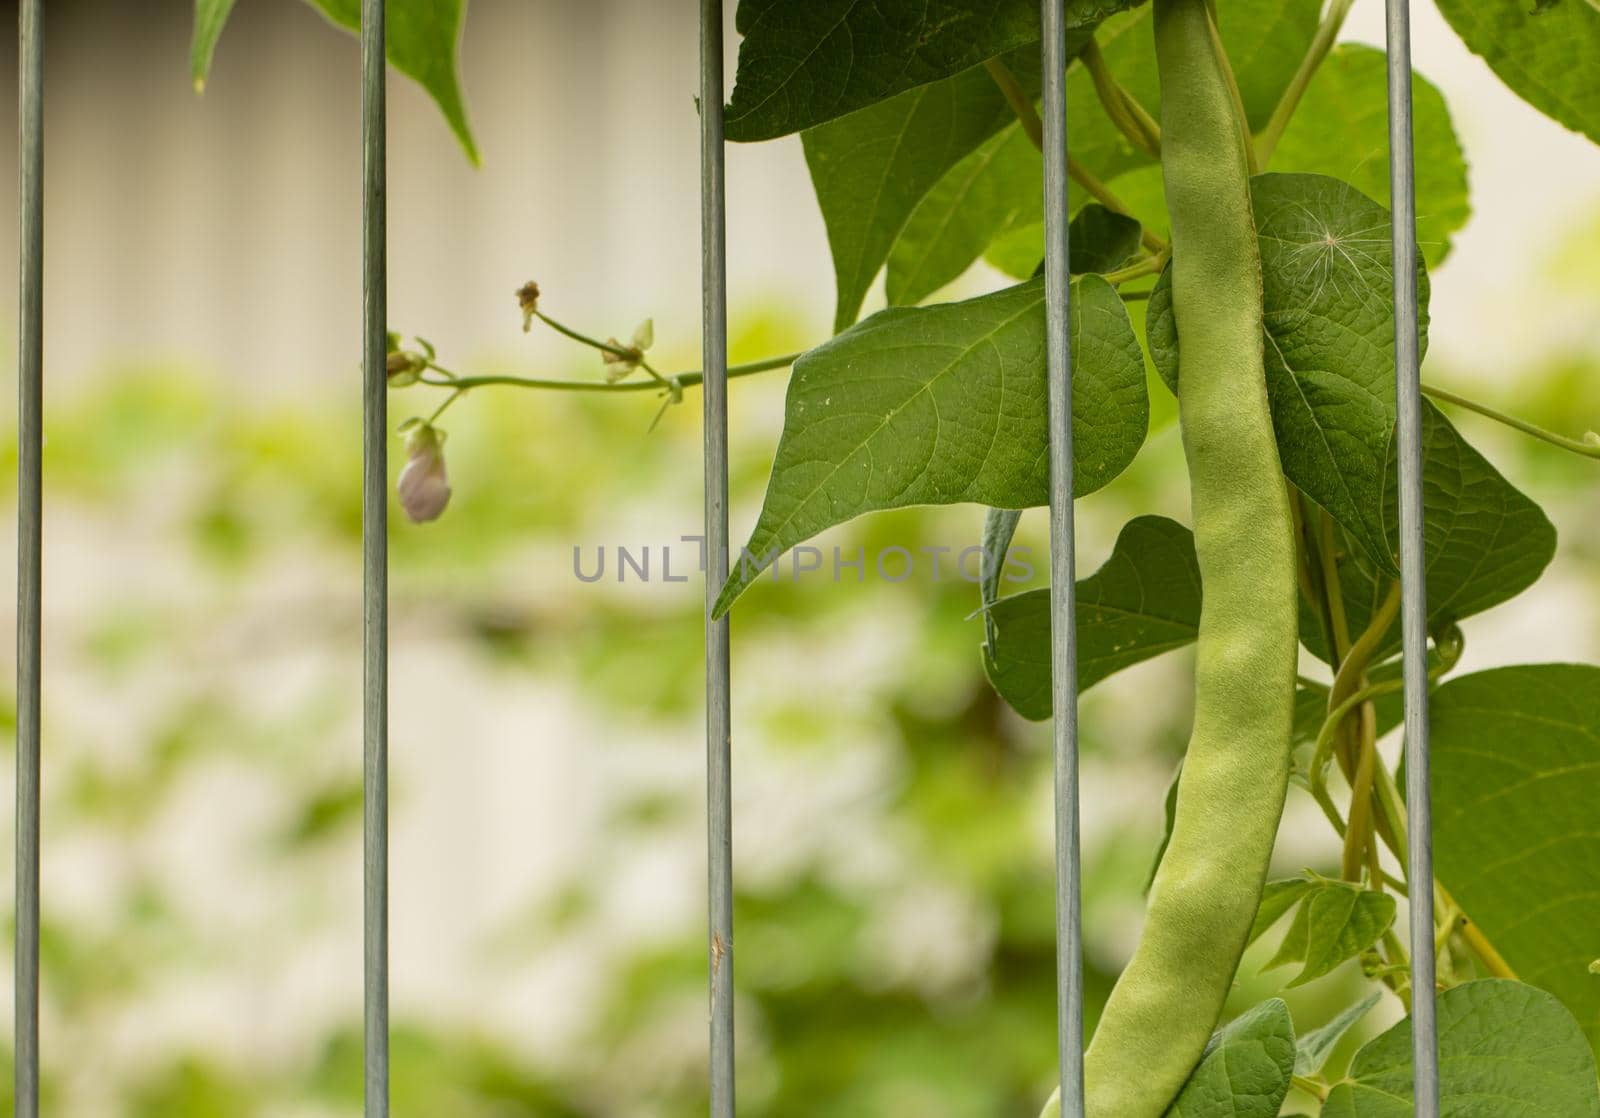 Beans grow on the fence, climbing plant.